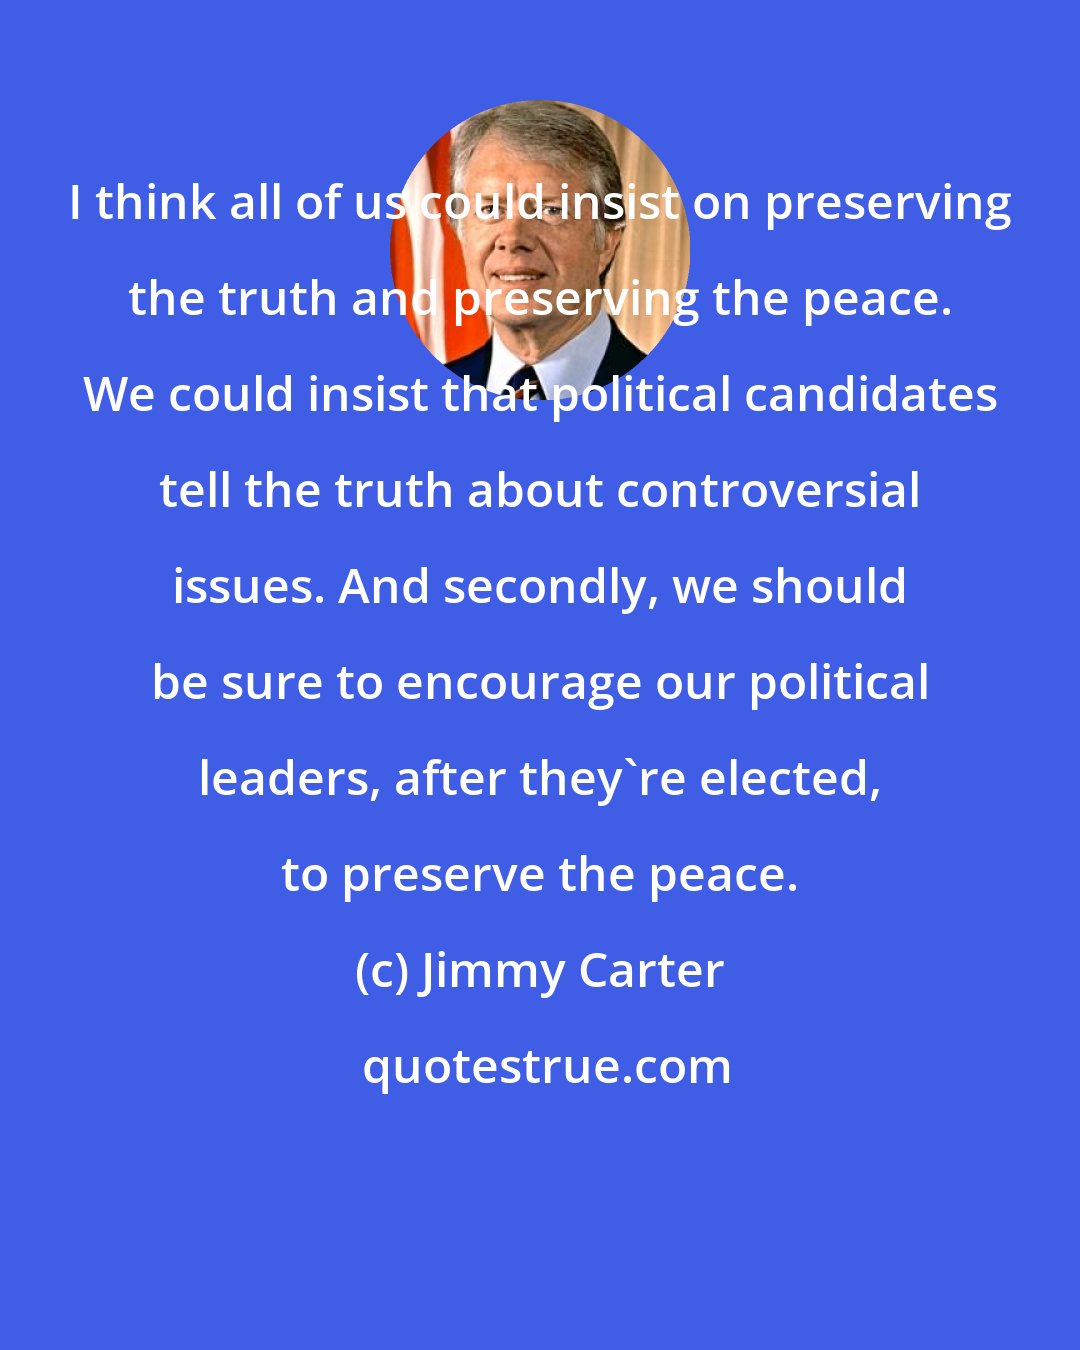 Jimmy Carter: I think all of us could insist on preserving the truth and preserving the peace. We could insist that political candidates tell the truth about controversial issues. And secondly, we should be sure to encourage our political leaders, after they're elected, to preserve the peace.